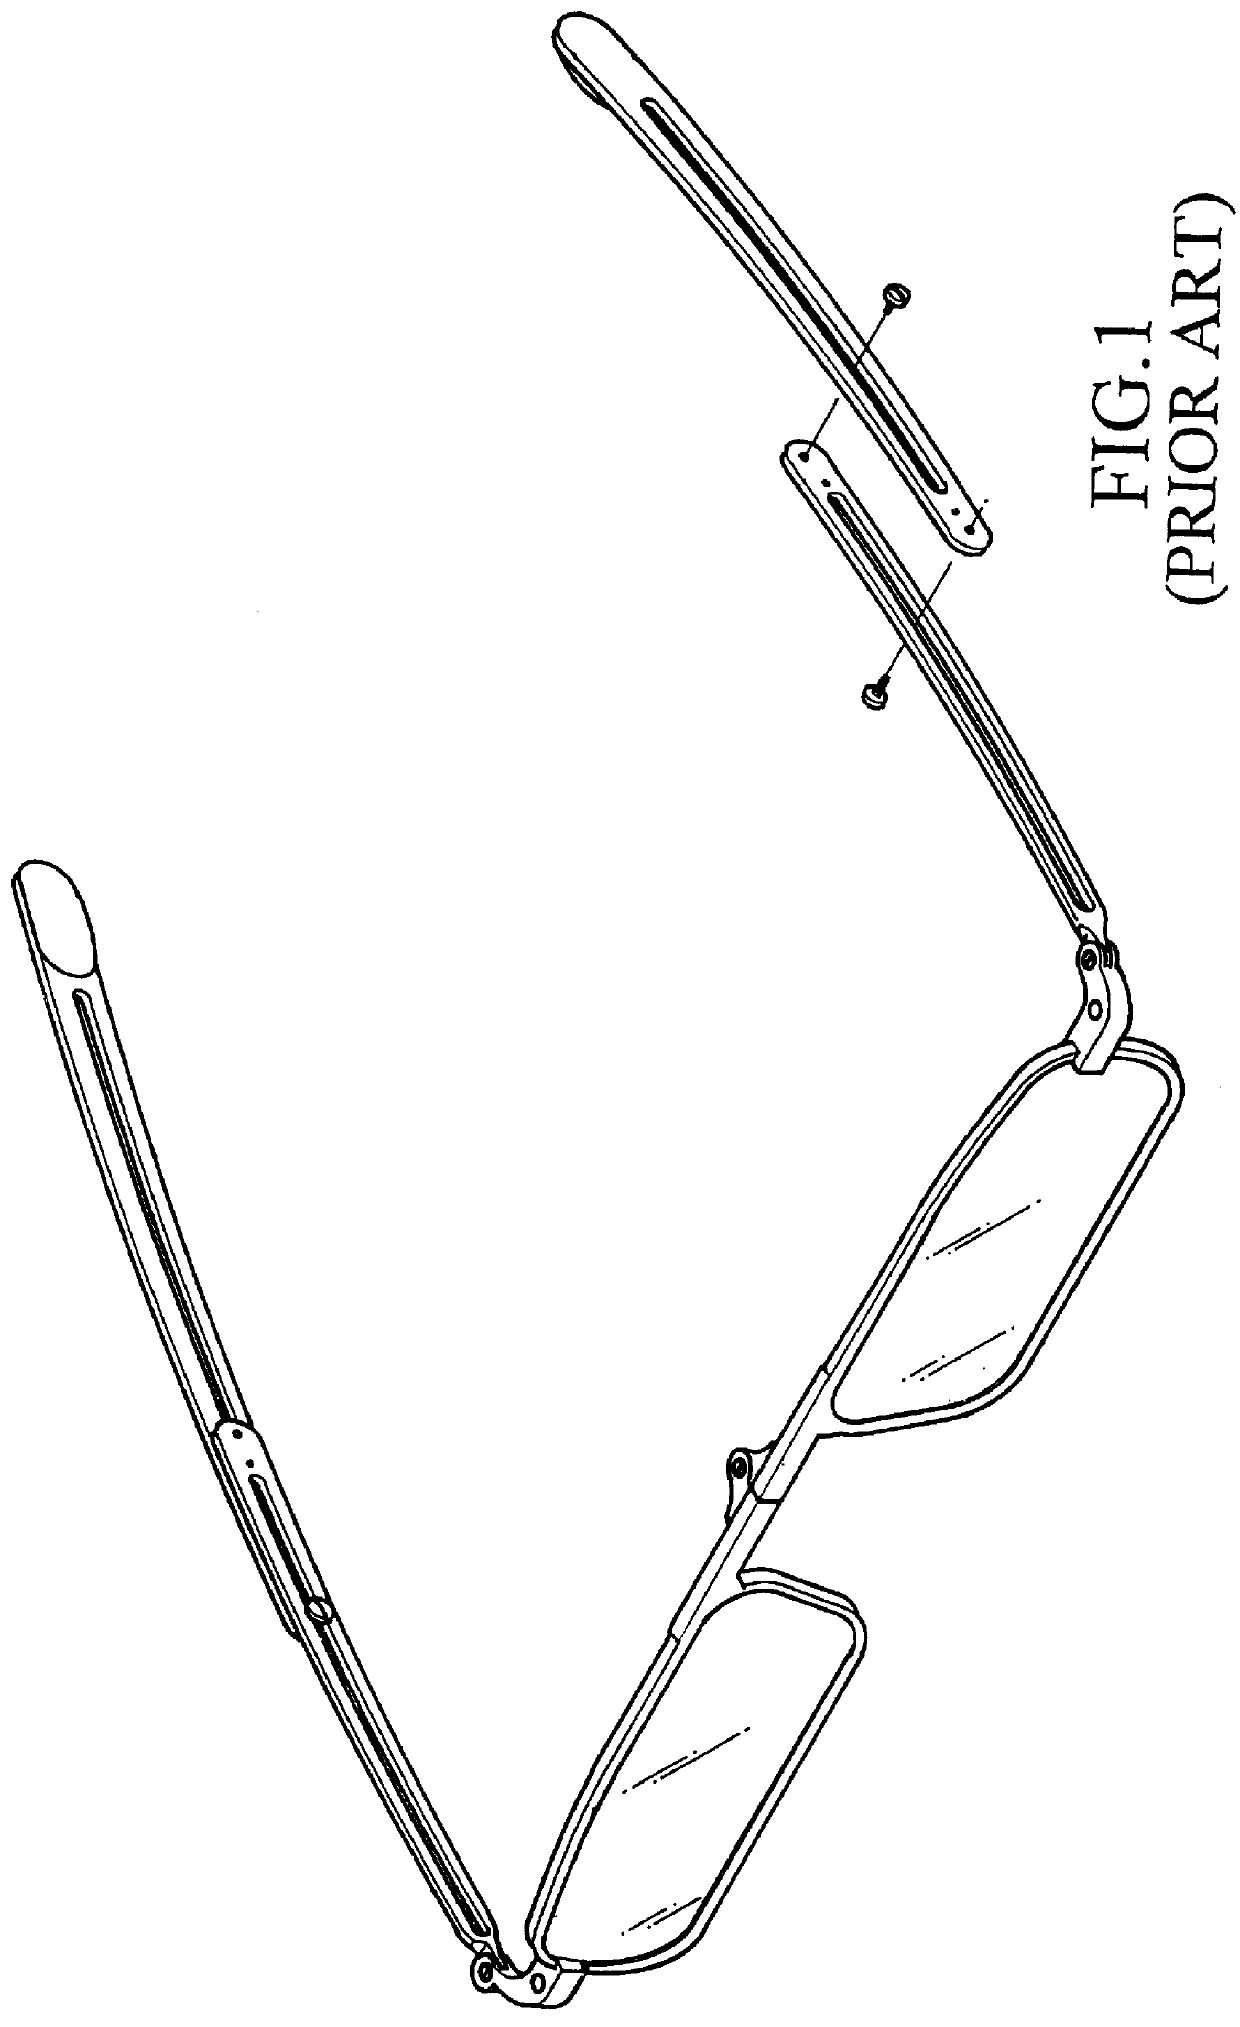 Foldable compact glasses having non-interfering temples in folding